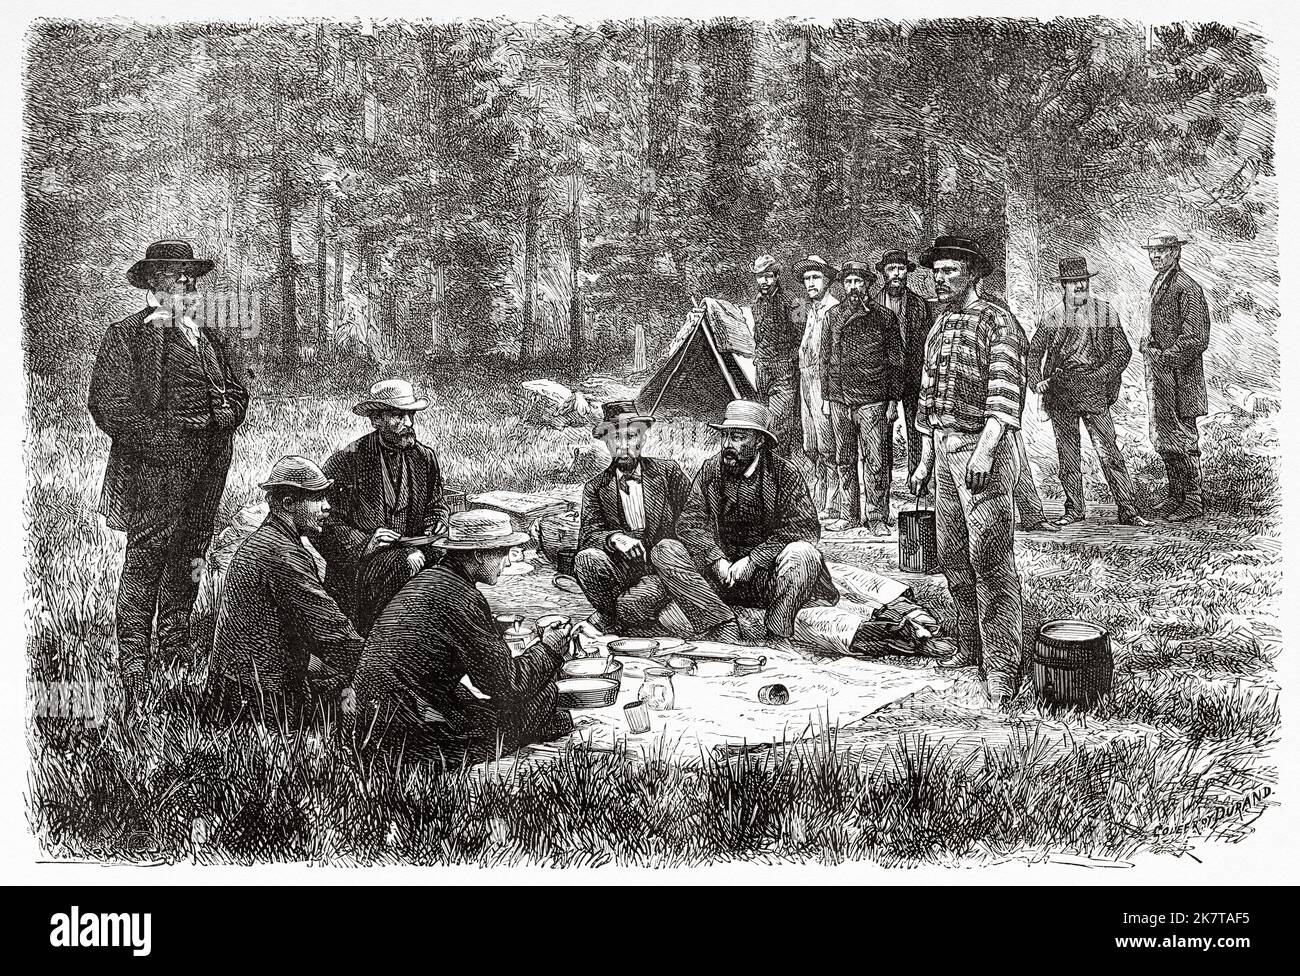 Members of the mission having lunch: Hayden, Hamp, Stevenson, Blackmore. Colorado. USA, United States, North America. America's Switzerland by Ferdinand Vandeveer Hayden and Whitney, 1873 Stock Photo